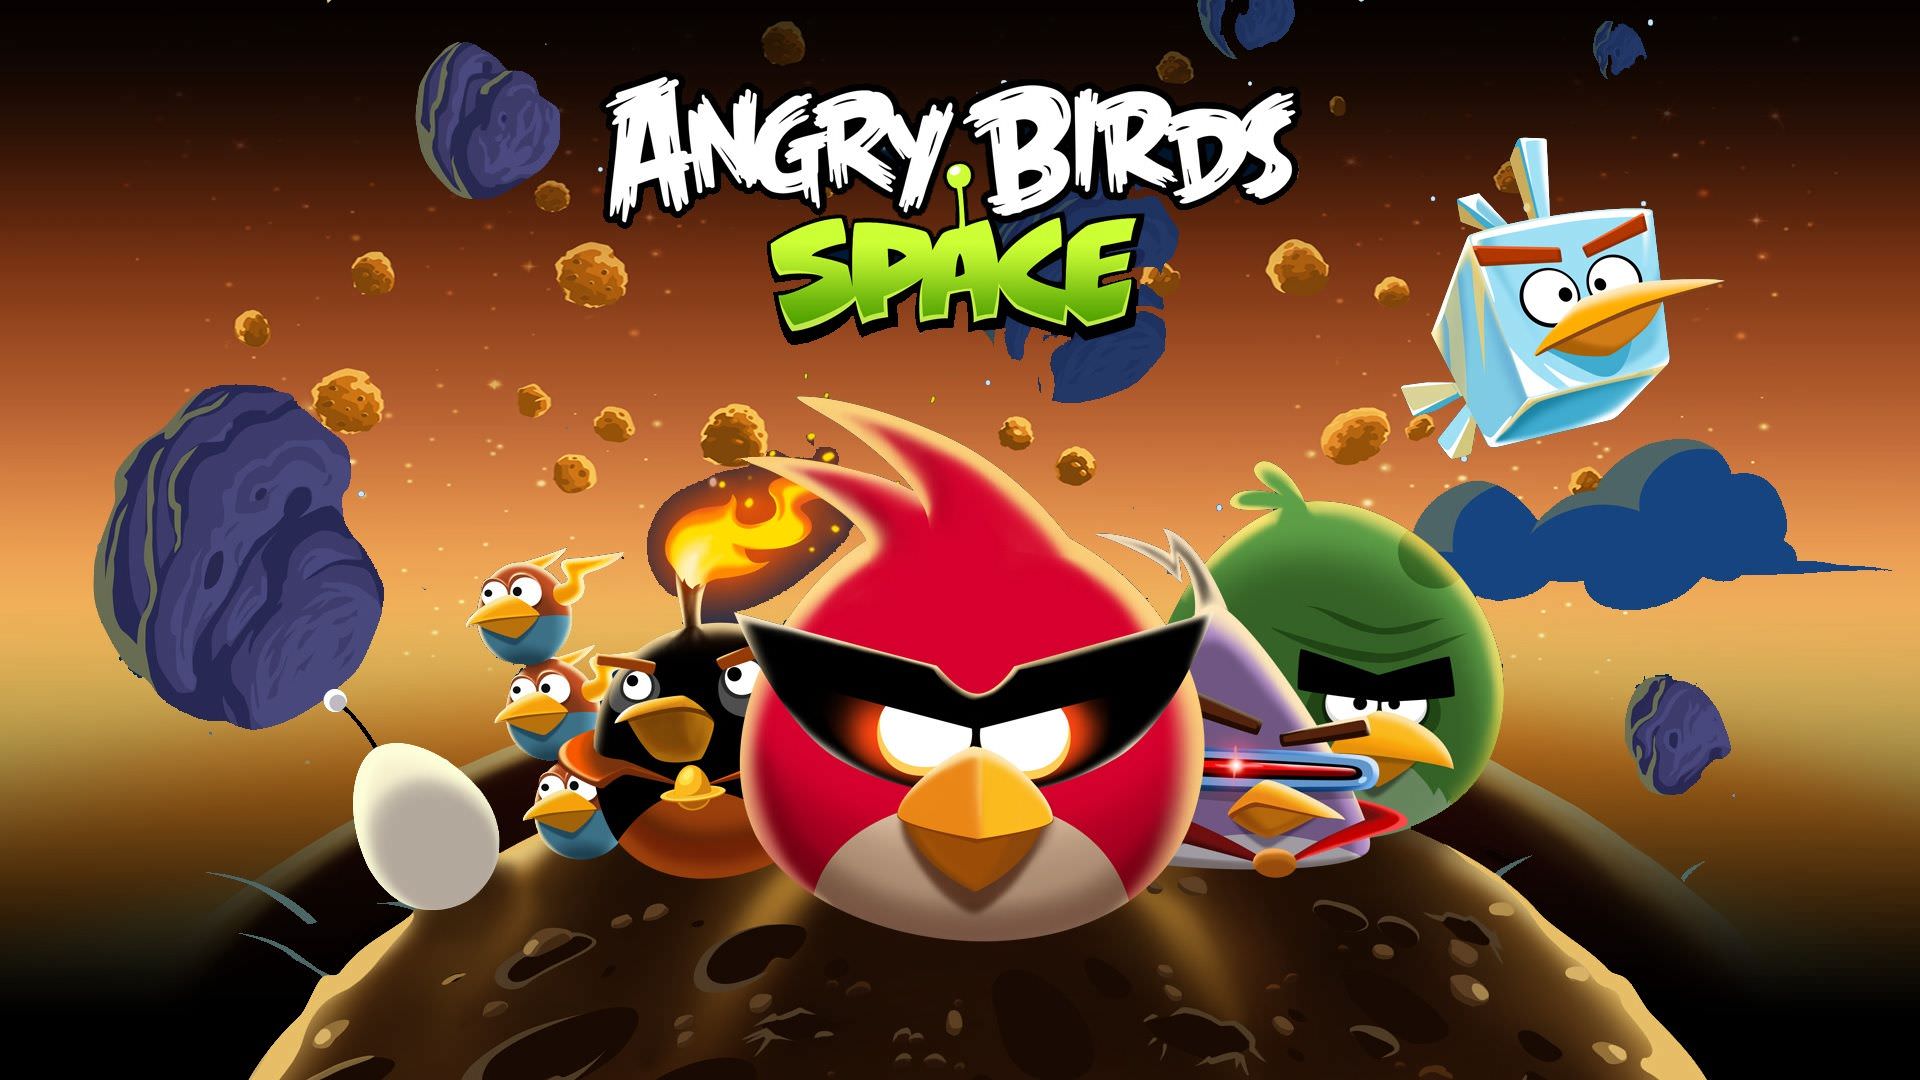 Angry Birds in space Angry Birds space